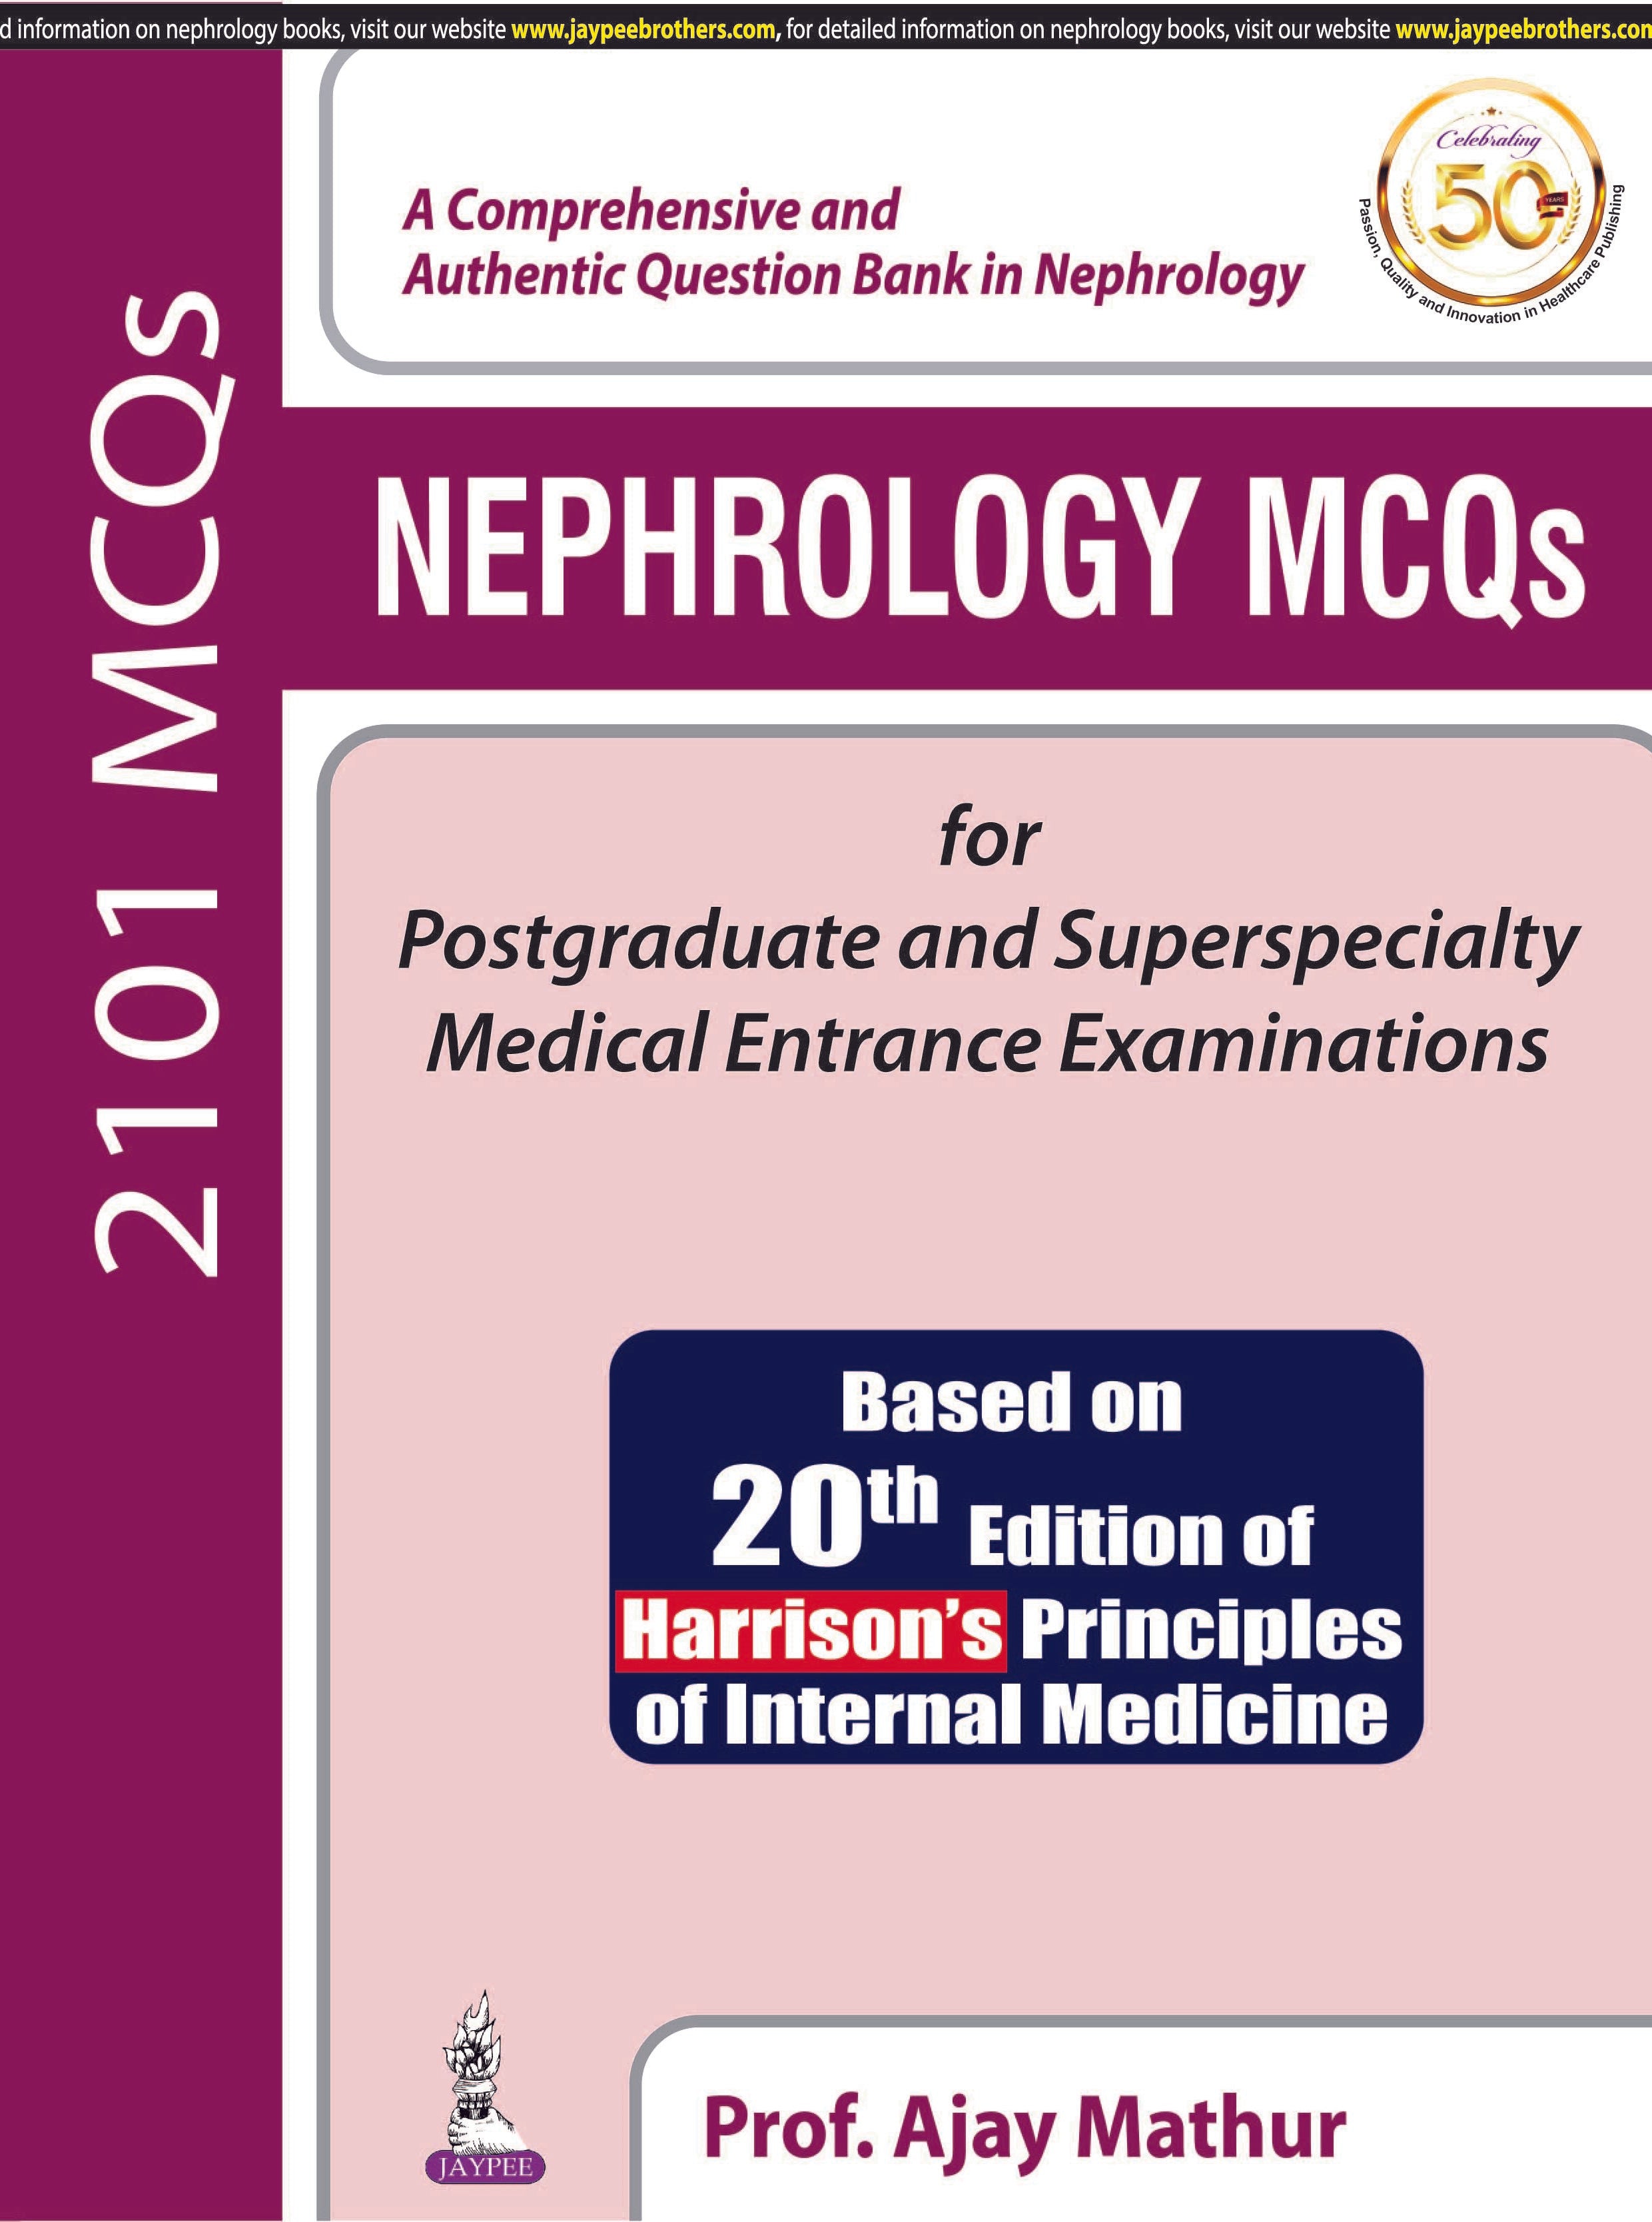 NEPHROLOGY MCQS FOR POSTGRADUATE AND SUPERSPECIALTY MEDICAL ENTRANCE EXAMINATIONS
,1/E,AJAY MATHUR